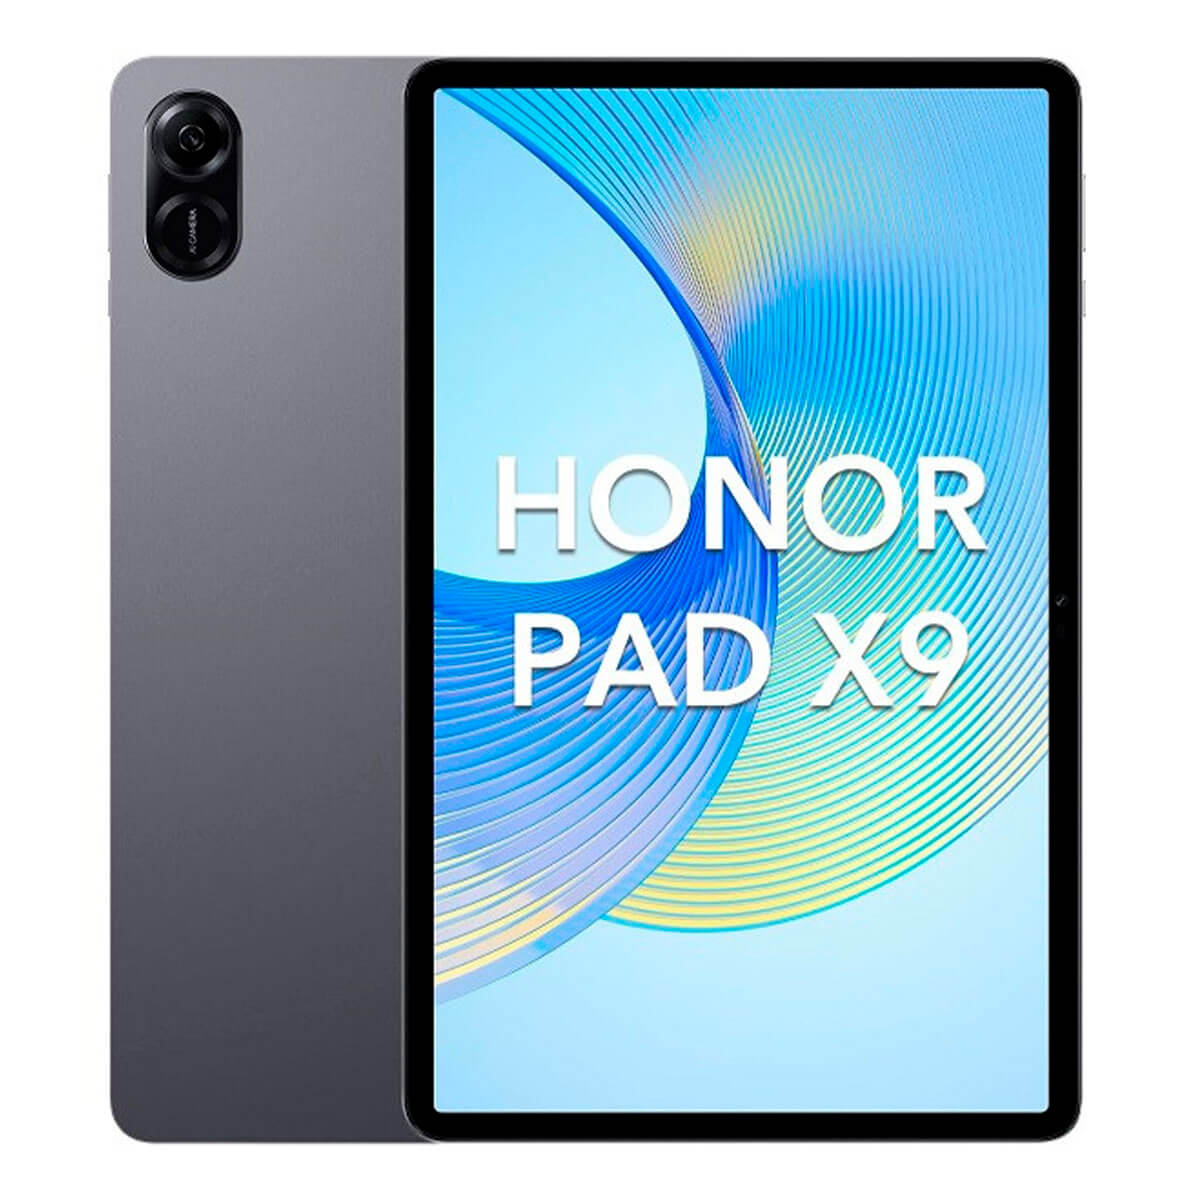 HONOR PAD X9 11,5" 4GB/128GB WI-FI GRIS (SPACE GRAY) | Tablets